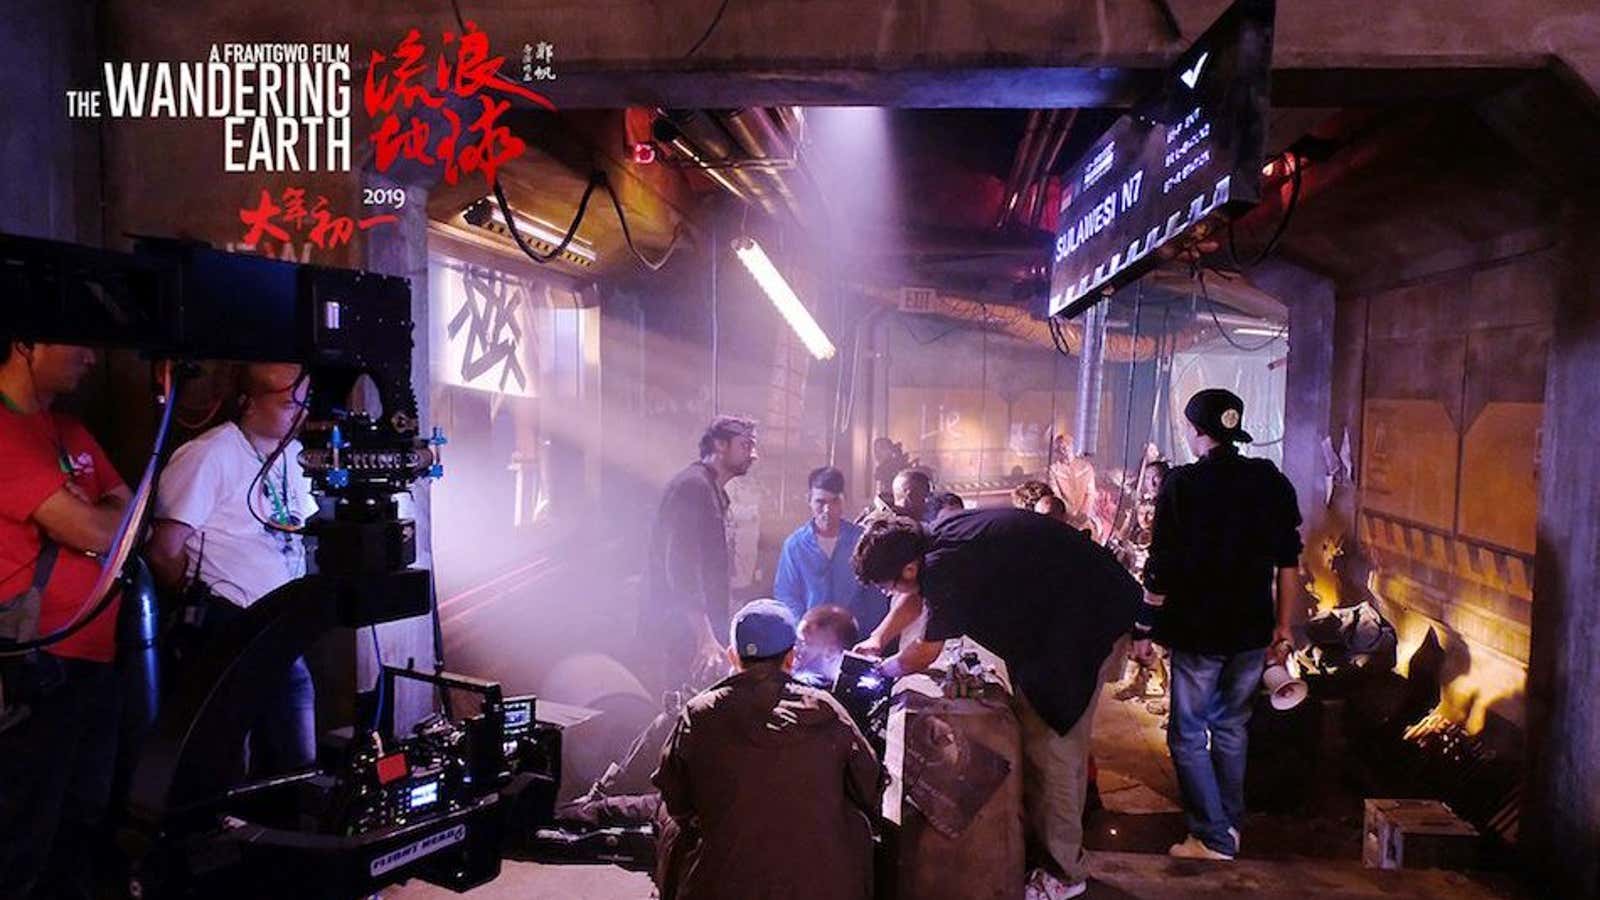 On the set of China’s “The Wandering Earth.”